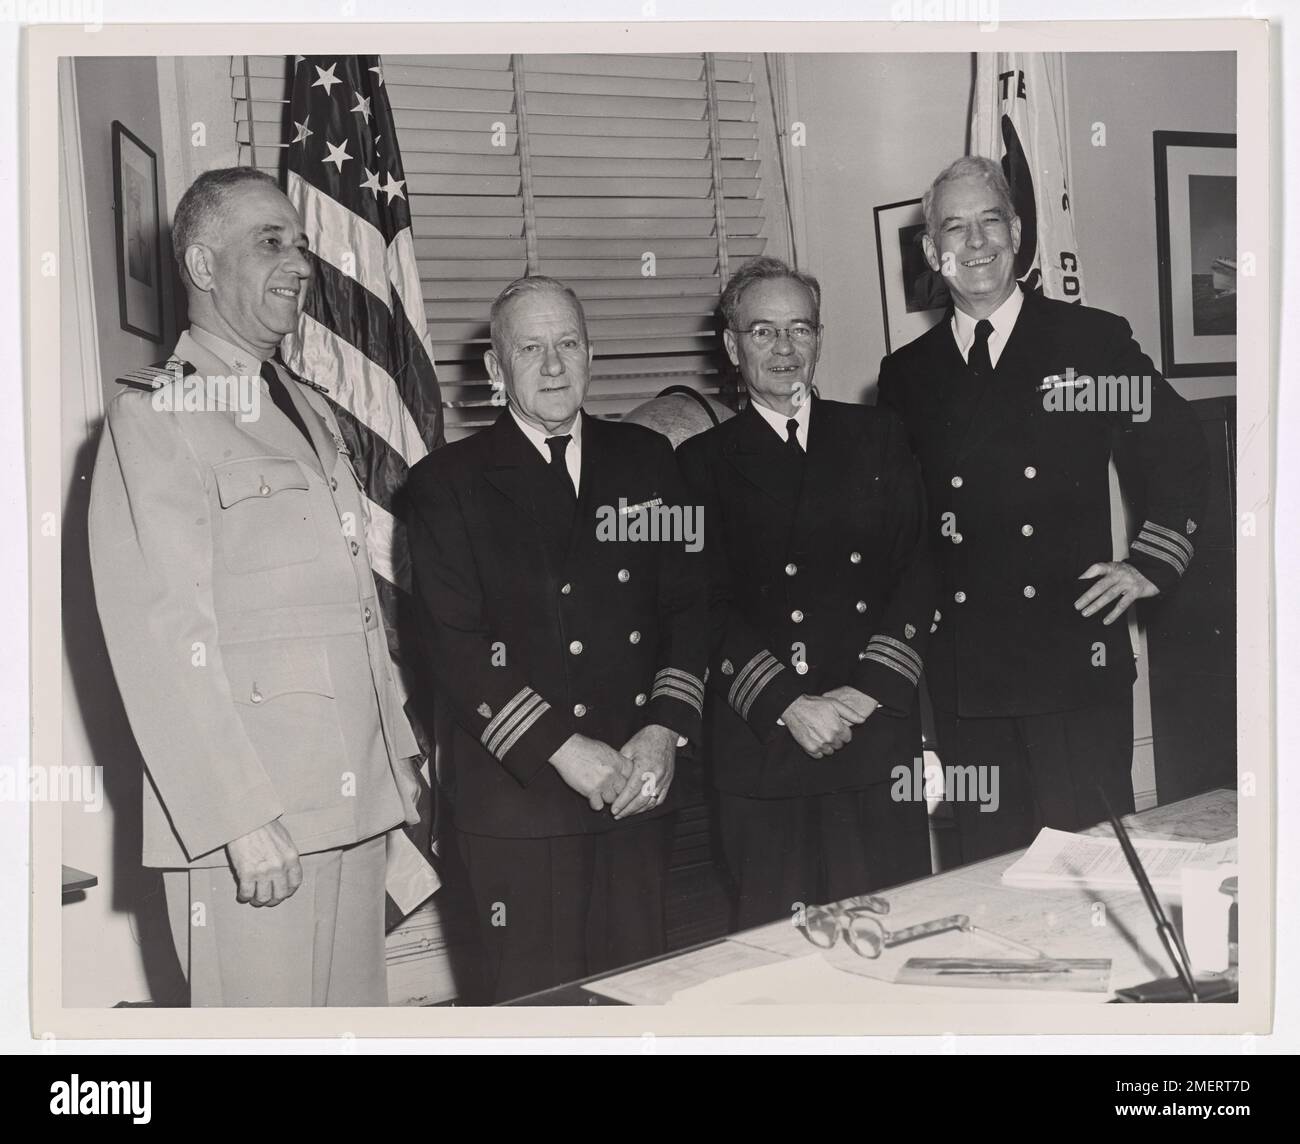 Retirement day for two USCG Commanders, Thomas S. Coffee and Francis R. Dillenkoffer. This picture shows 'retirement' day for two USCG Commanders, Thomas S. Coffee (2nd from left) and Francis R. Dillenkoffer (extreme right). The others shown are Captain Frank A. Leamy (far left) and commander J. F. Kettler (second from right). Stock Photo